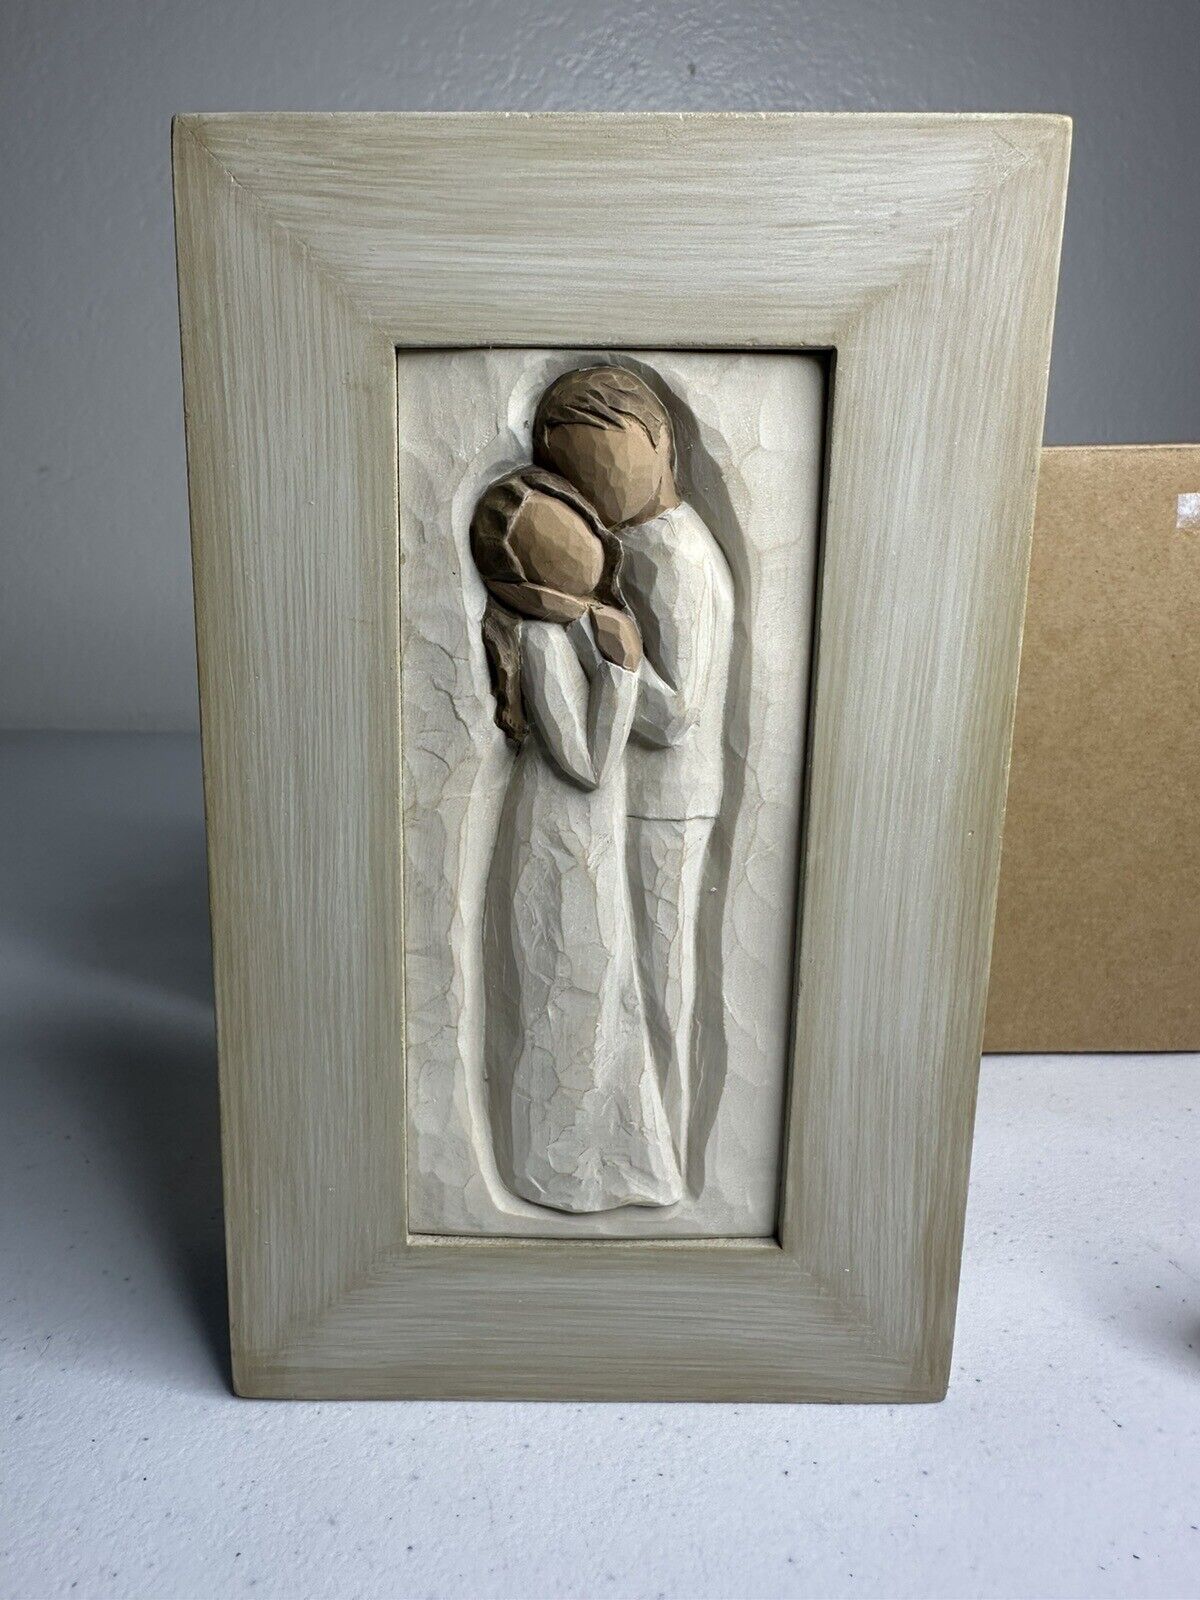 Willow Tree 'In Love's Embrace' Memory Box by Susan Lordi, 2005 - Exquisite Keepsake for Cherished Moments - TreasuTiques